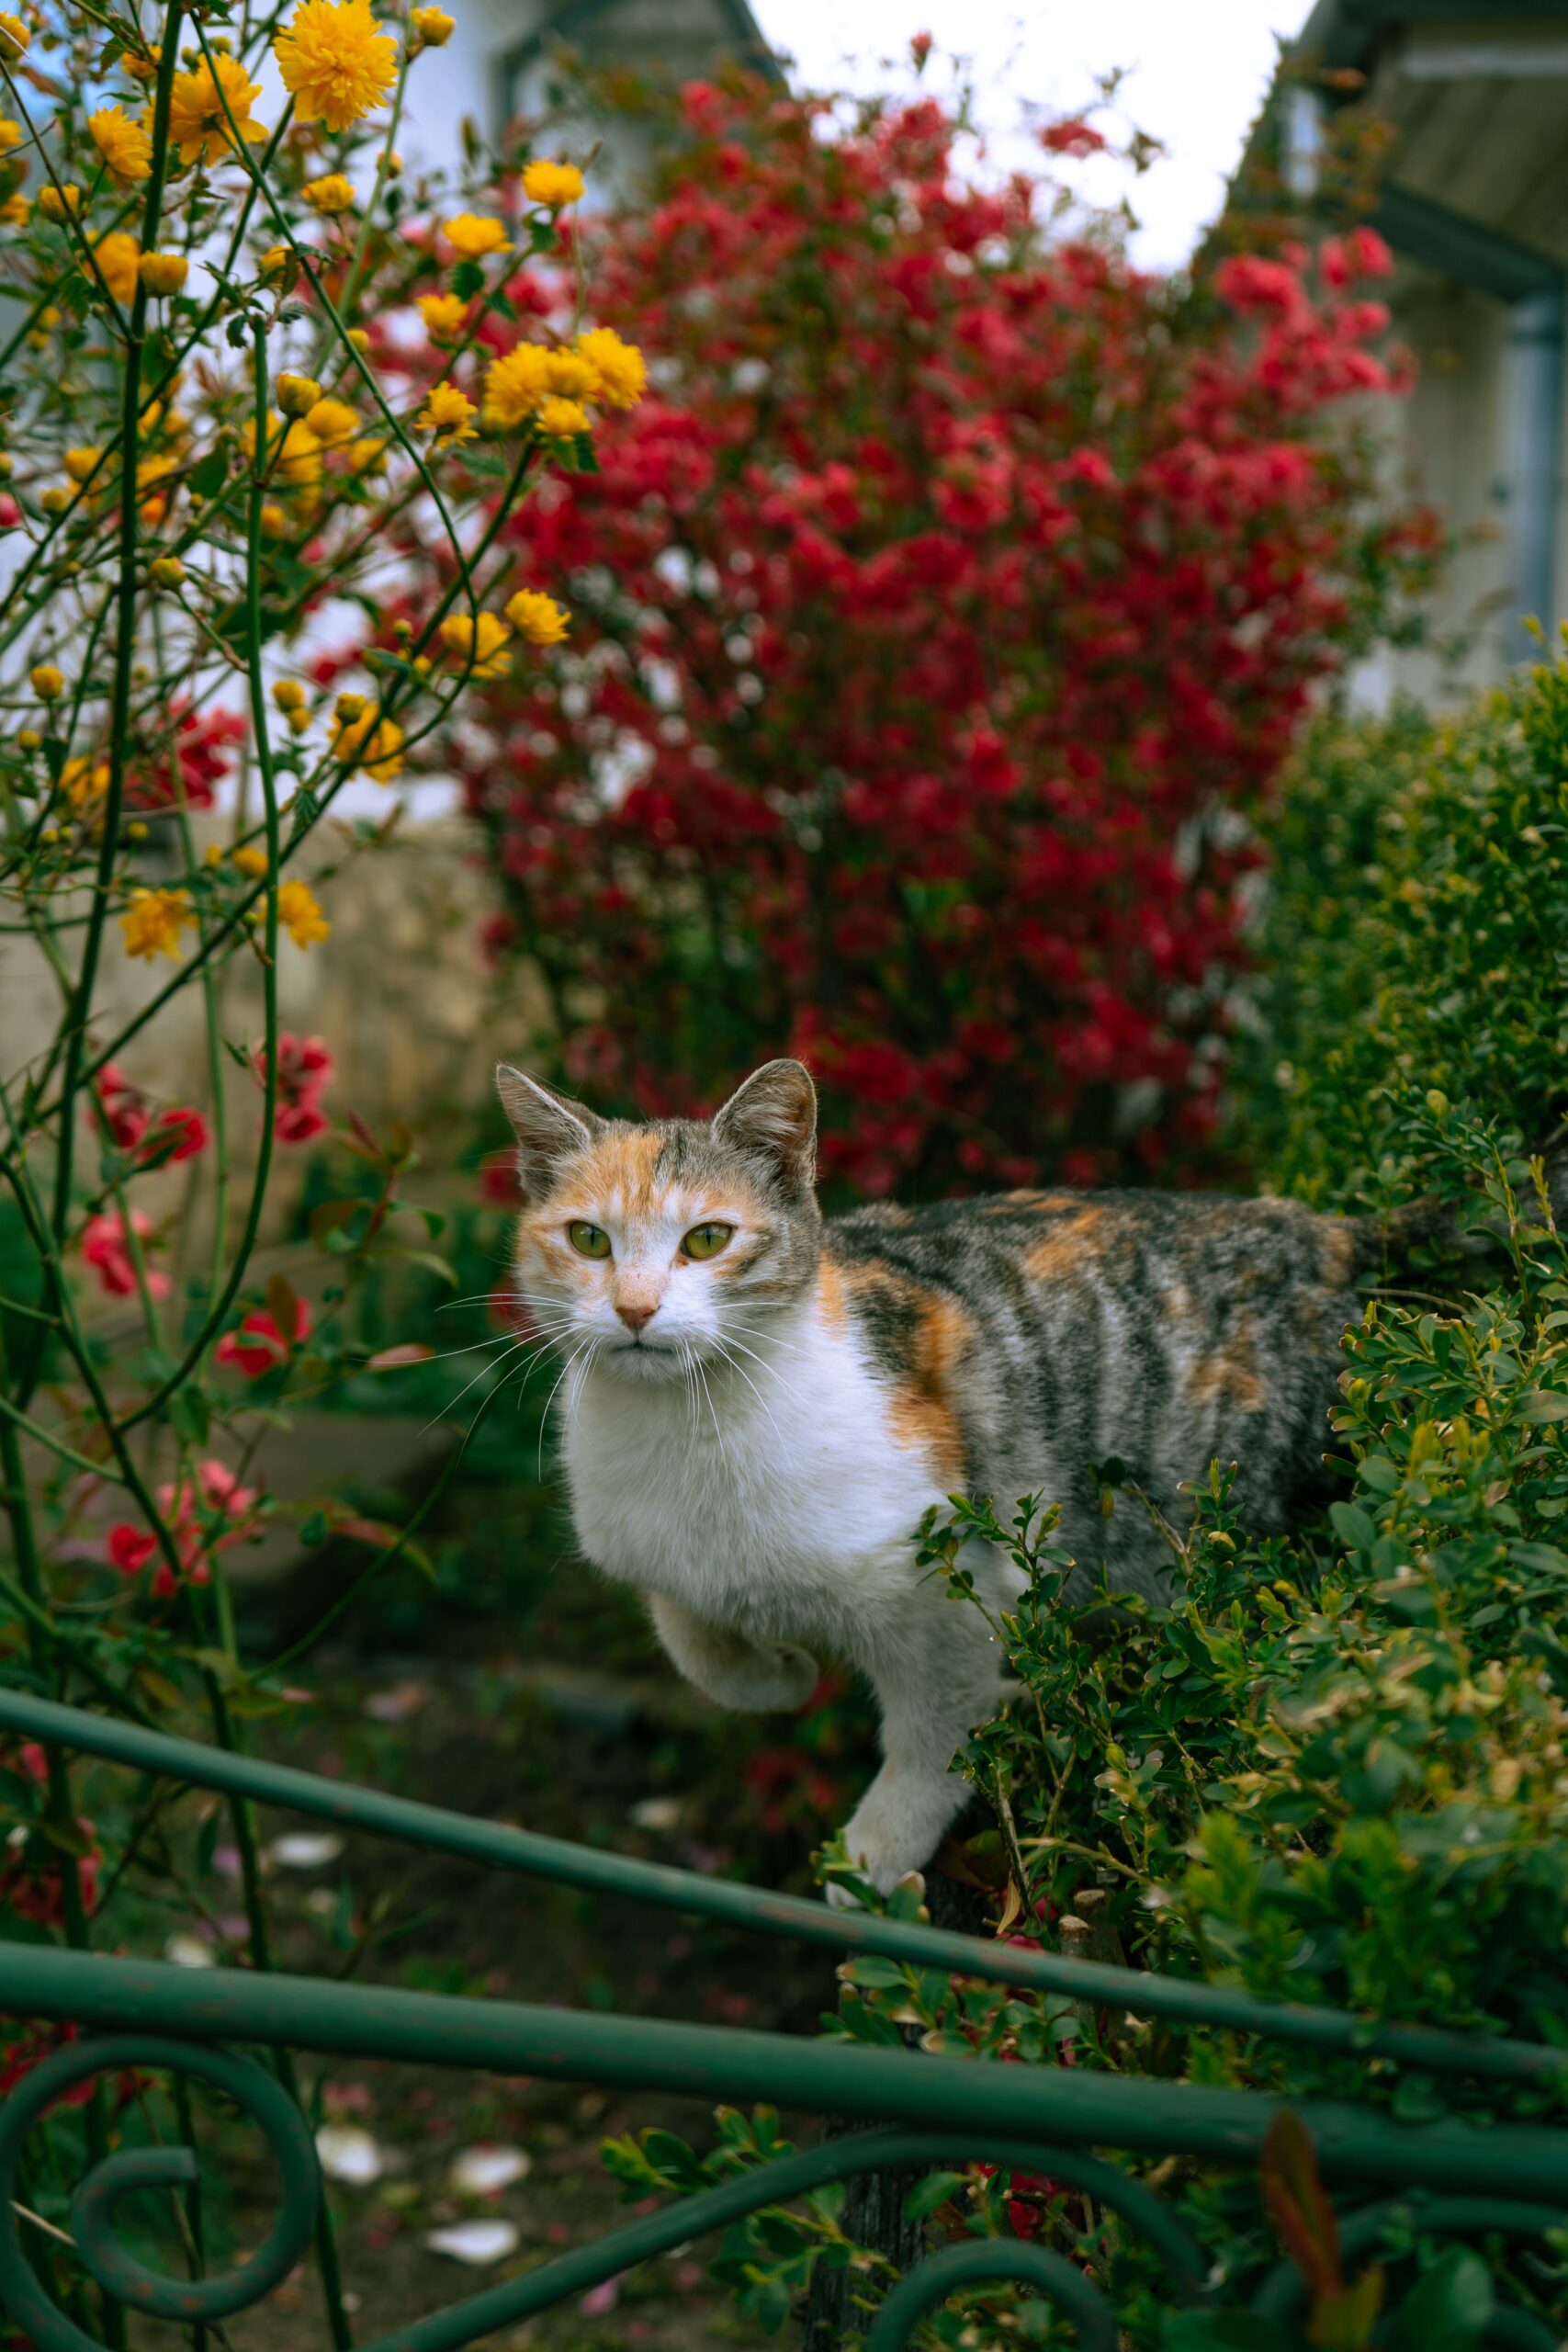 Pet-Safe Garden Guide: How to Create a Cat-Friendly Outdoor Space